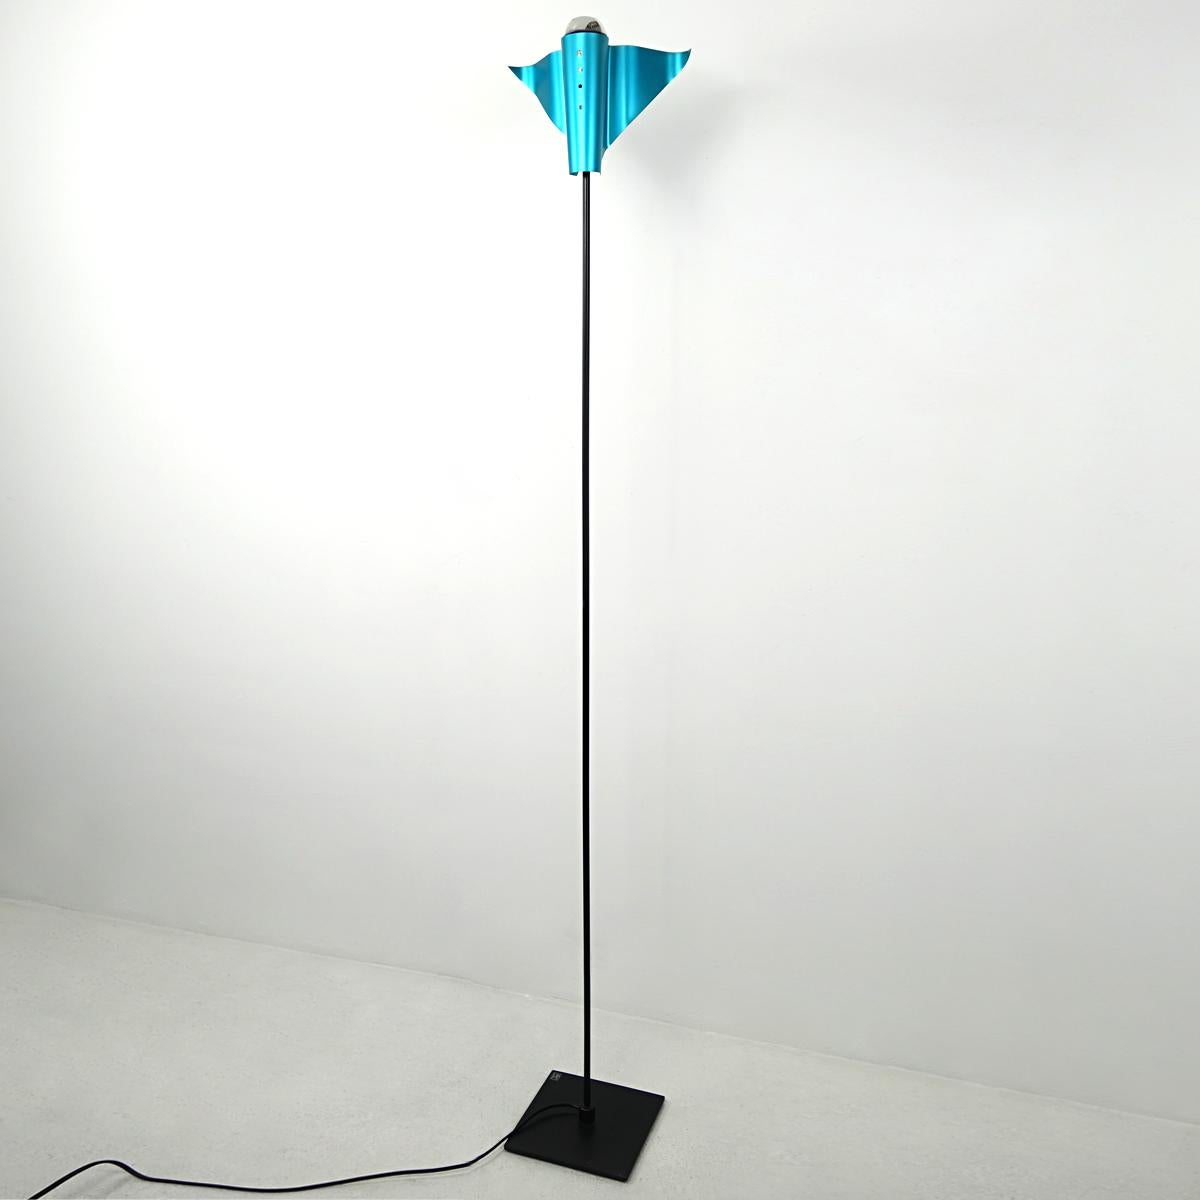 Charming floor lamp made by Dutch design firm Bjart Rhenen. 
The shade made of aluminium has the shape of a bird.
This lamp dates back to the 1980's. Bjart Rhenen no longer exists today.